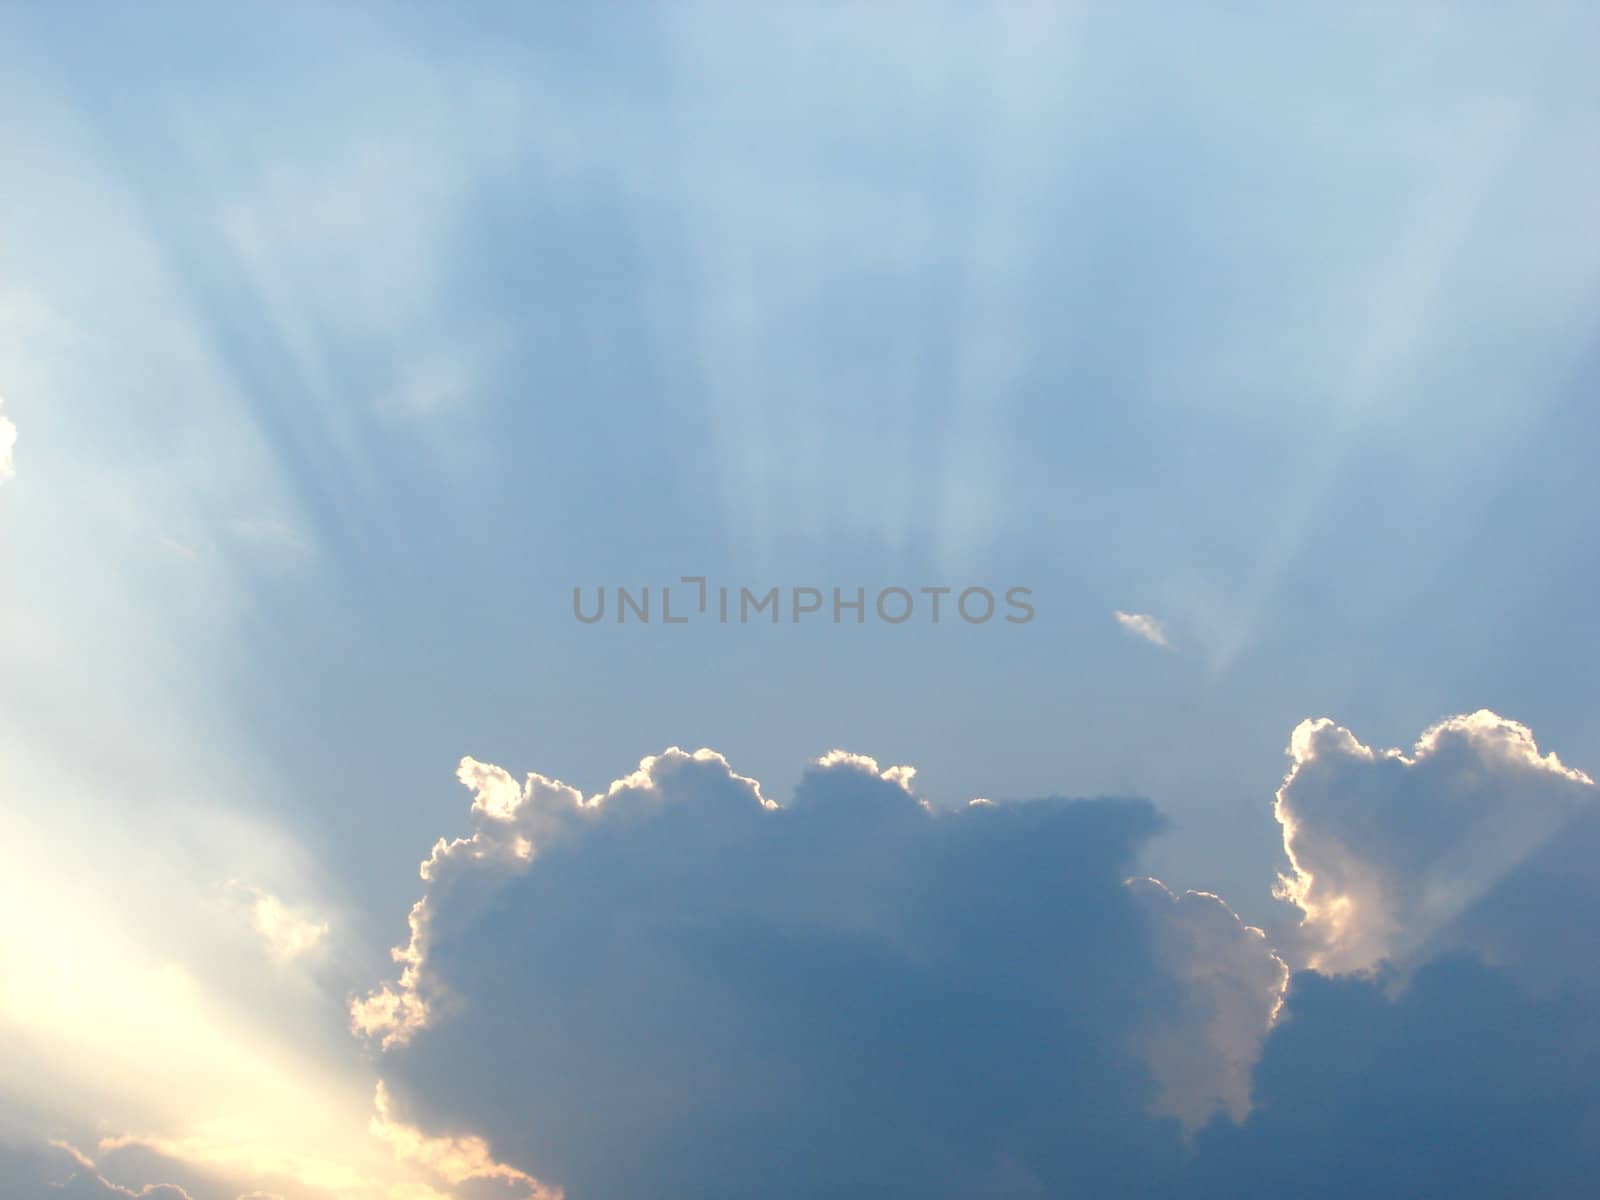 Clouds and sunrays in the sky